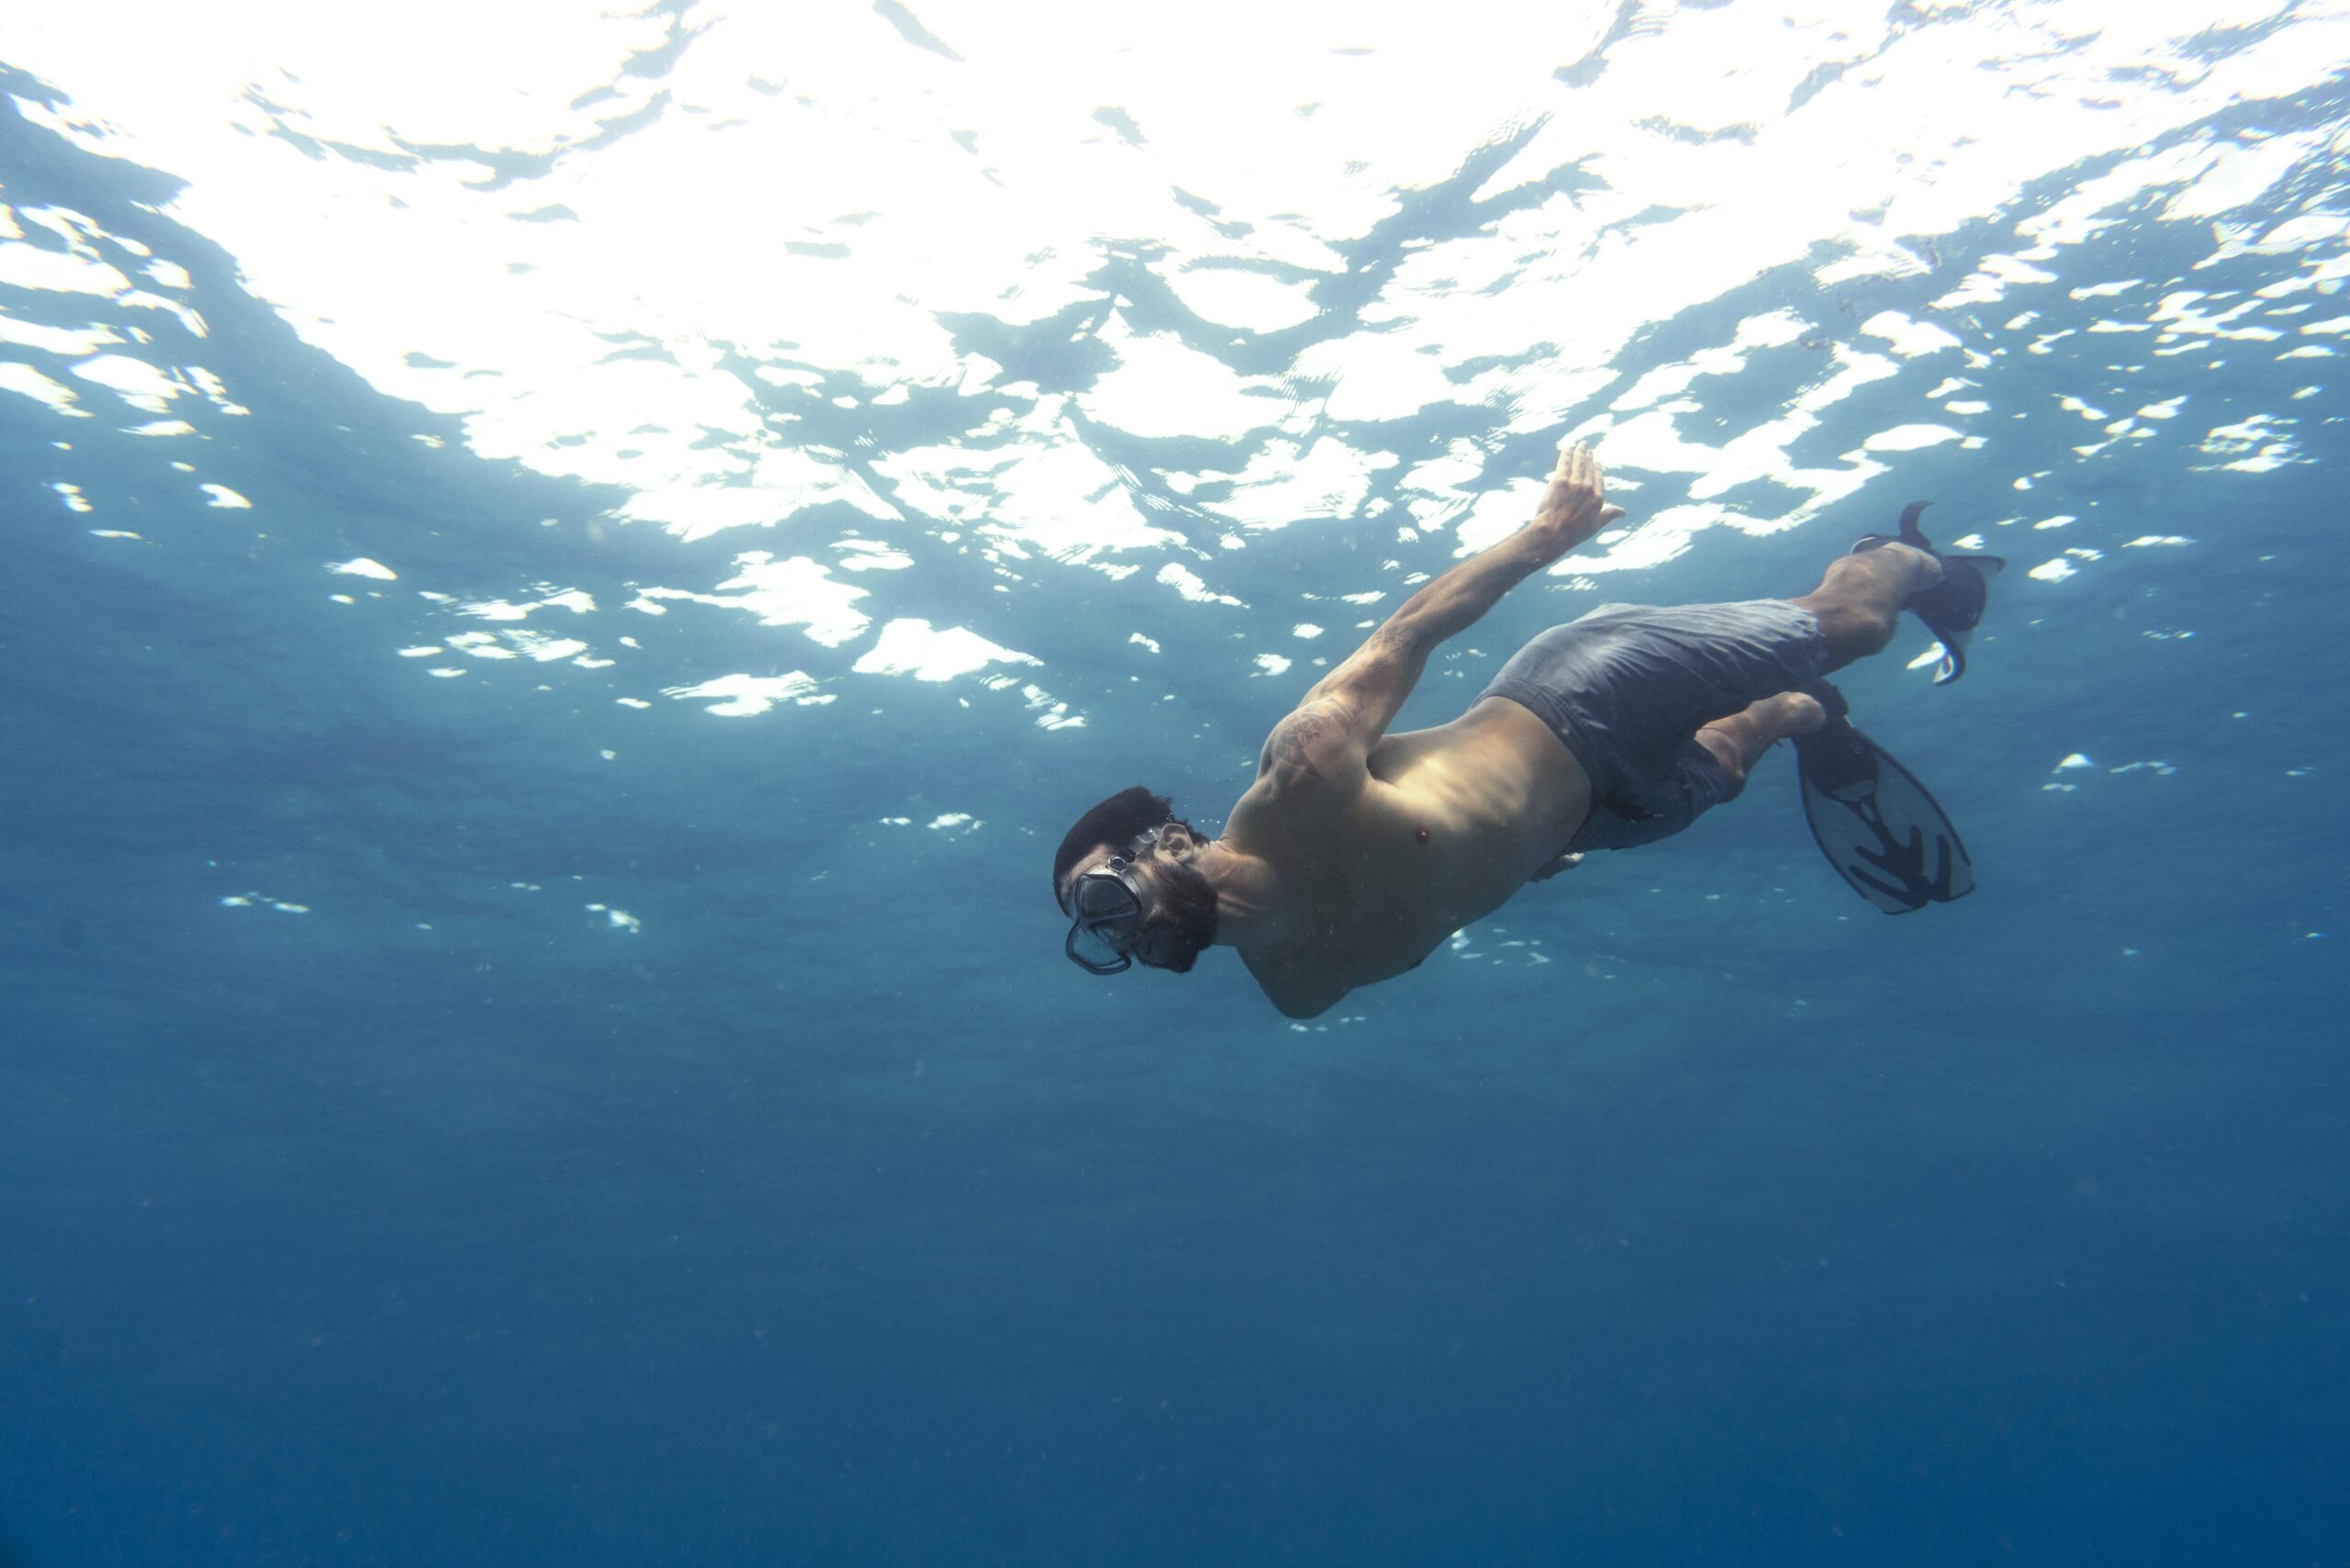 The Ultimate Guide to Finding Freediving Jobs Around World